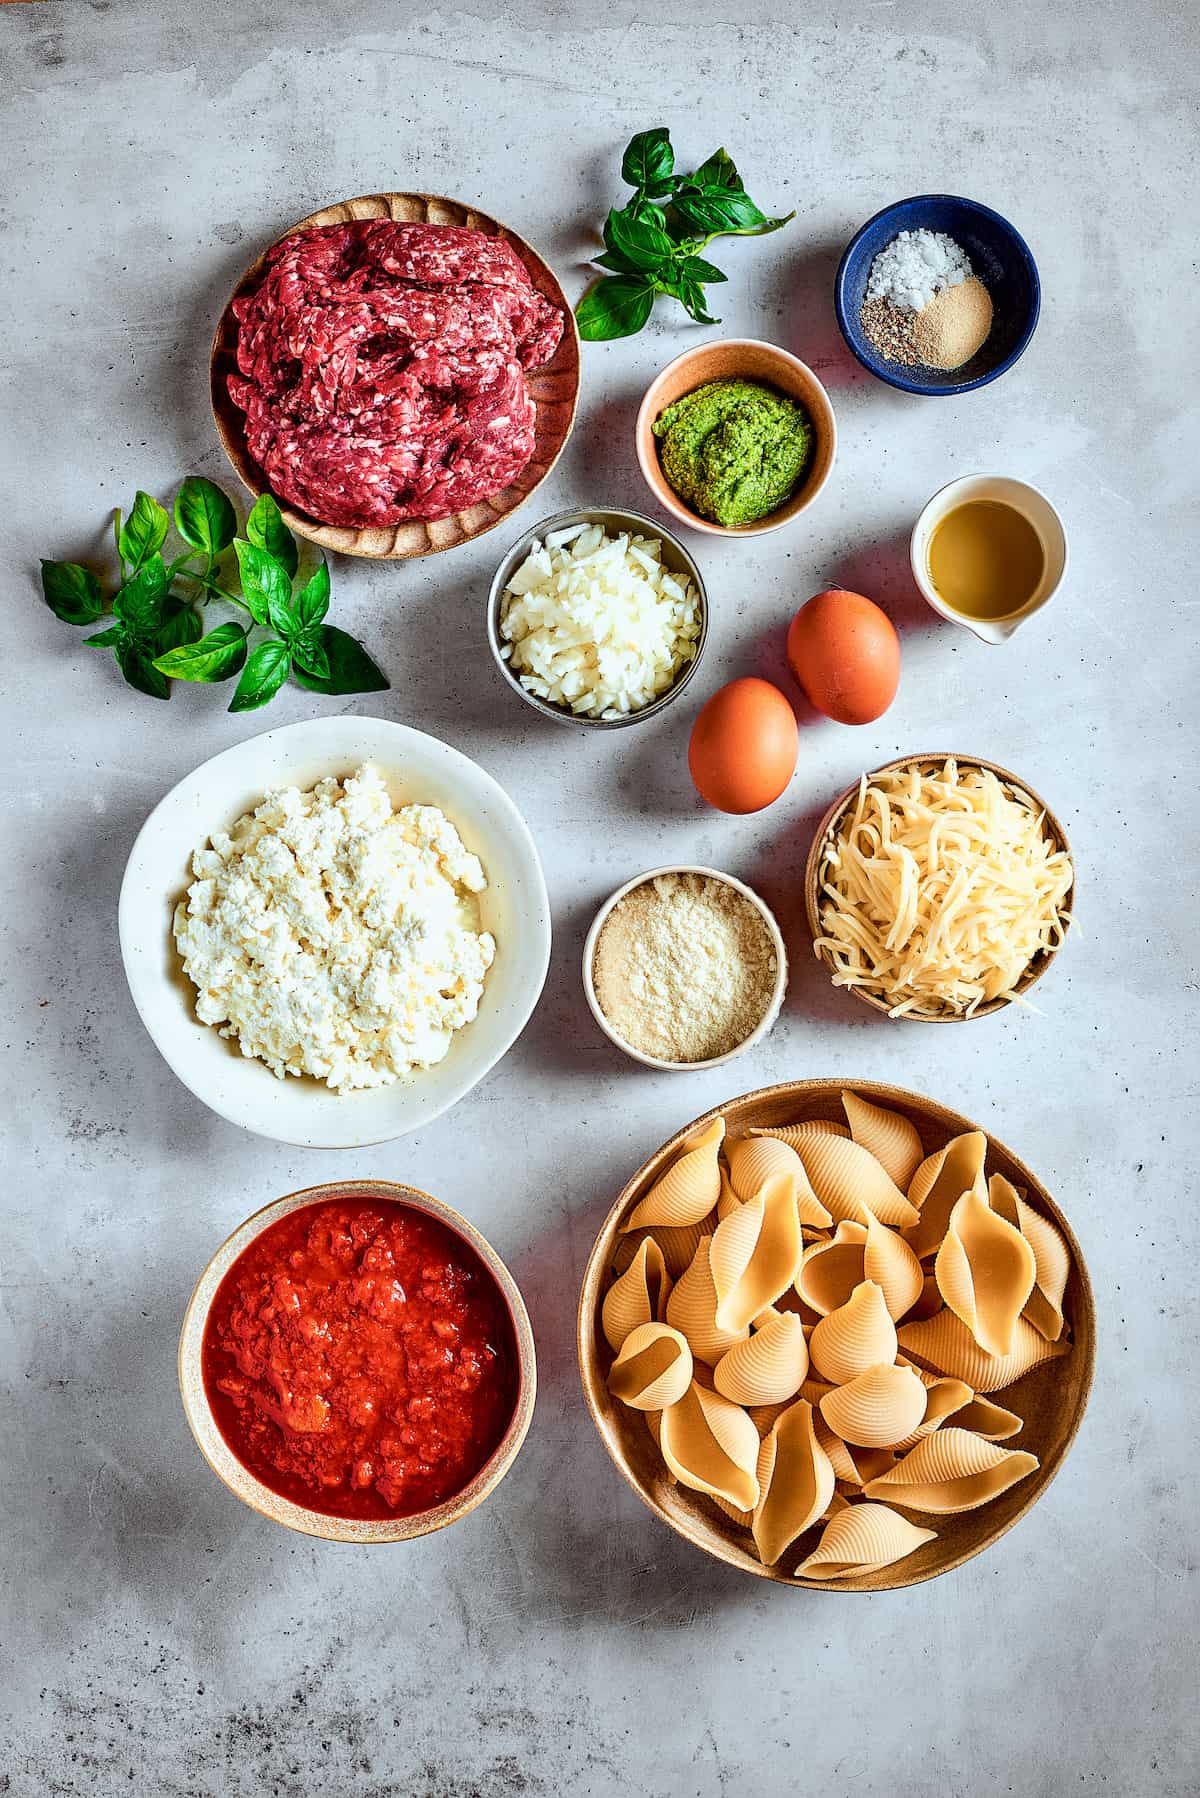 Ingredients for stuffed shells with meat are shown: eggs, pasta, cheeses, tomato sauce, spices, and meat.